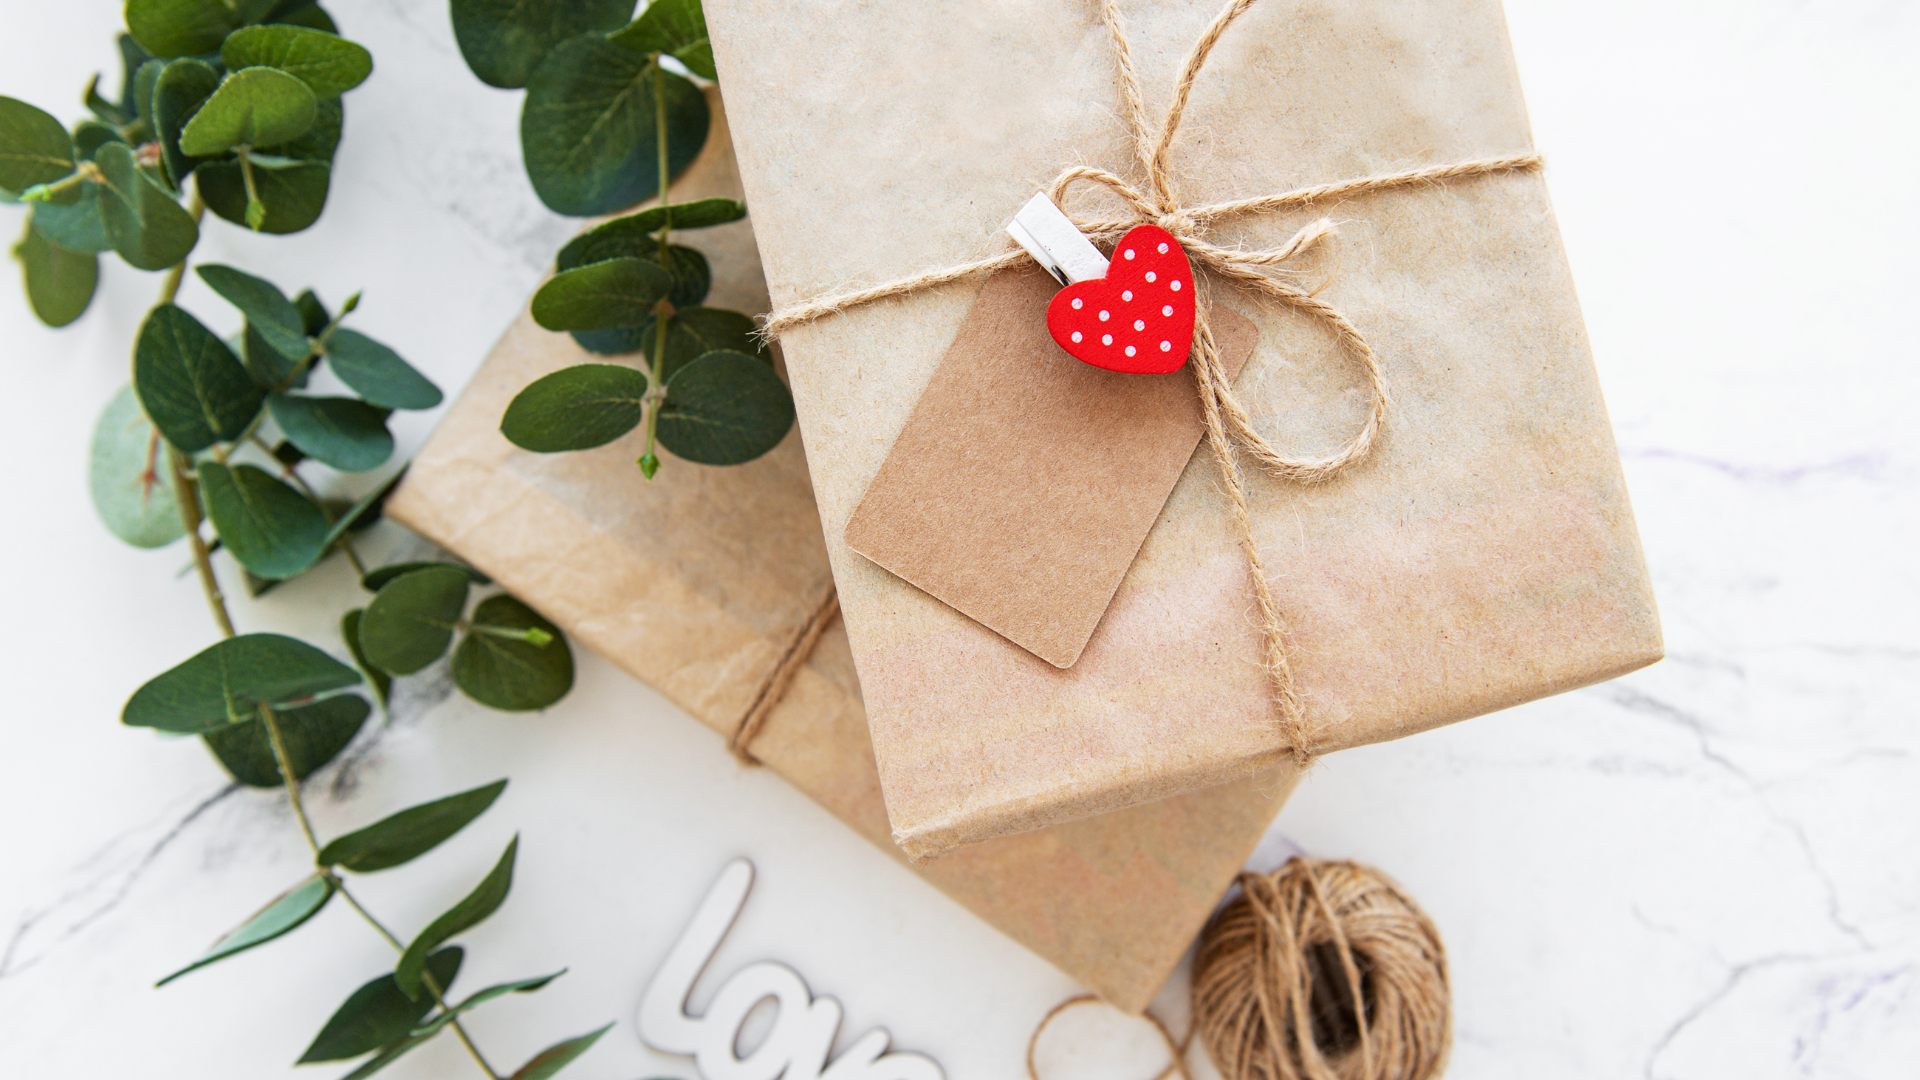 Corporate Gifting - Twine wrapped gift